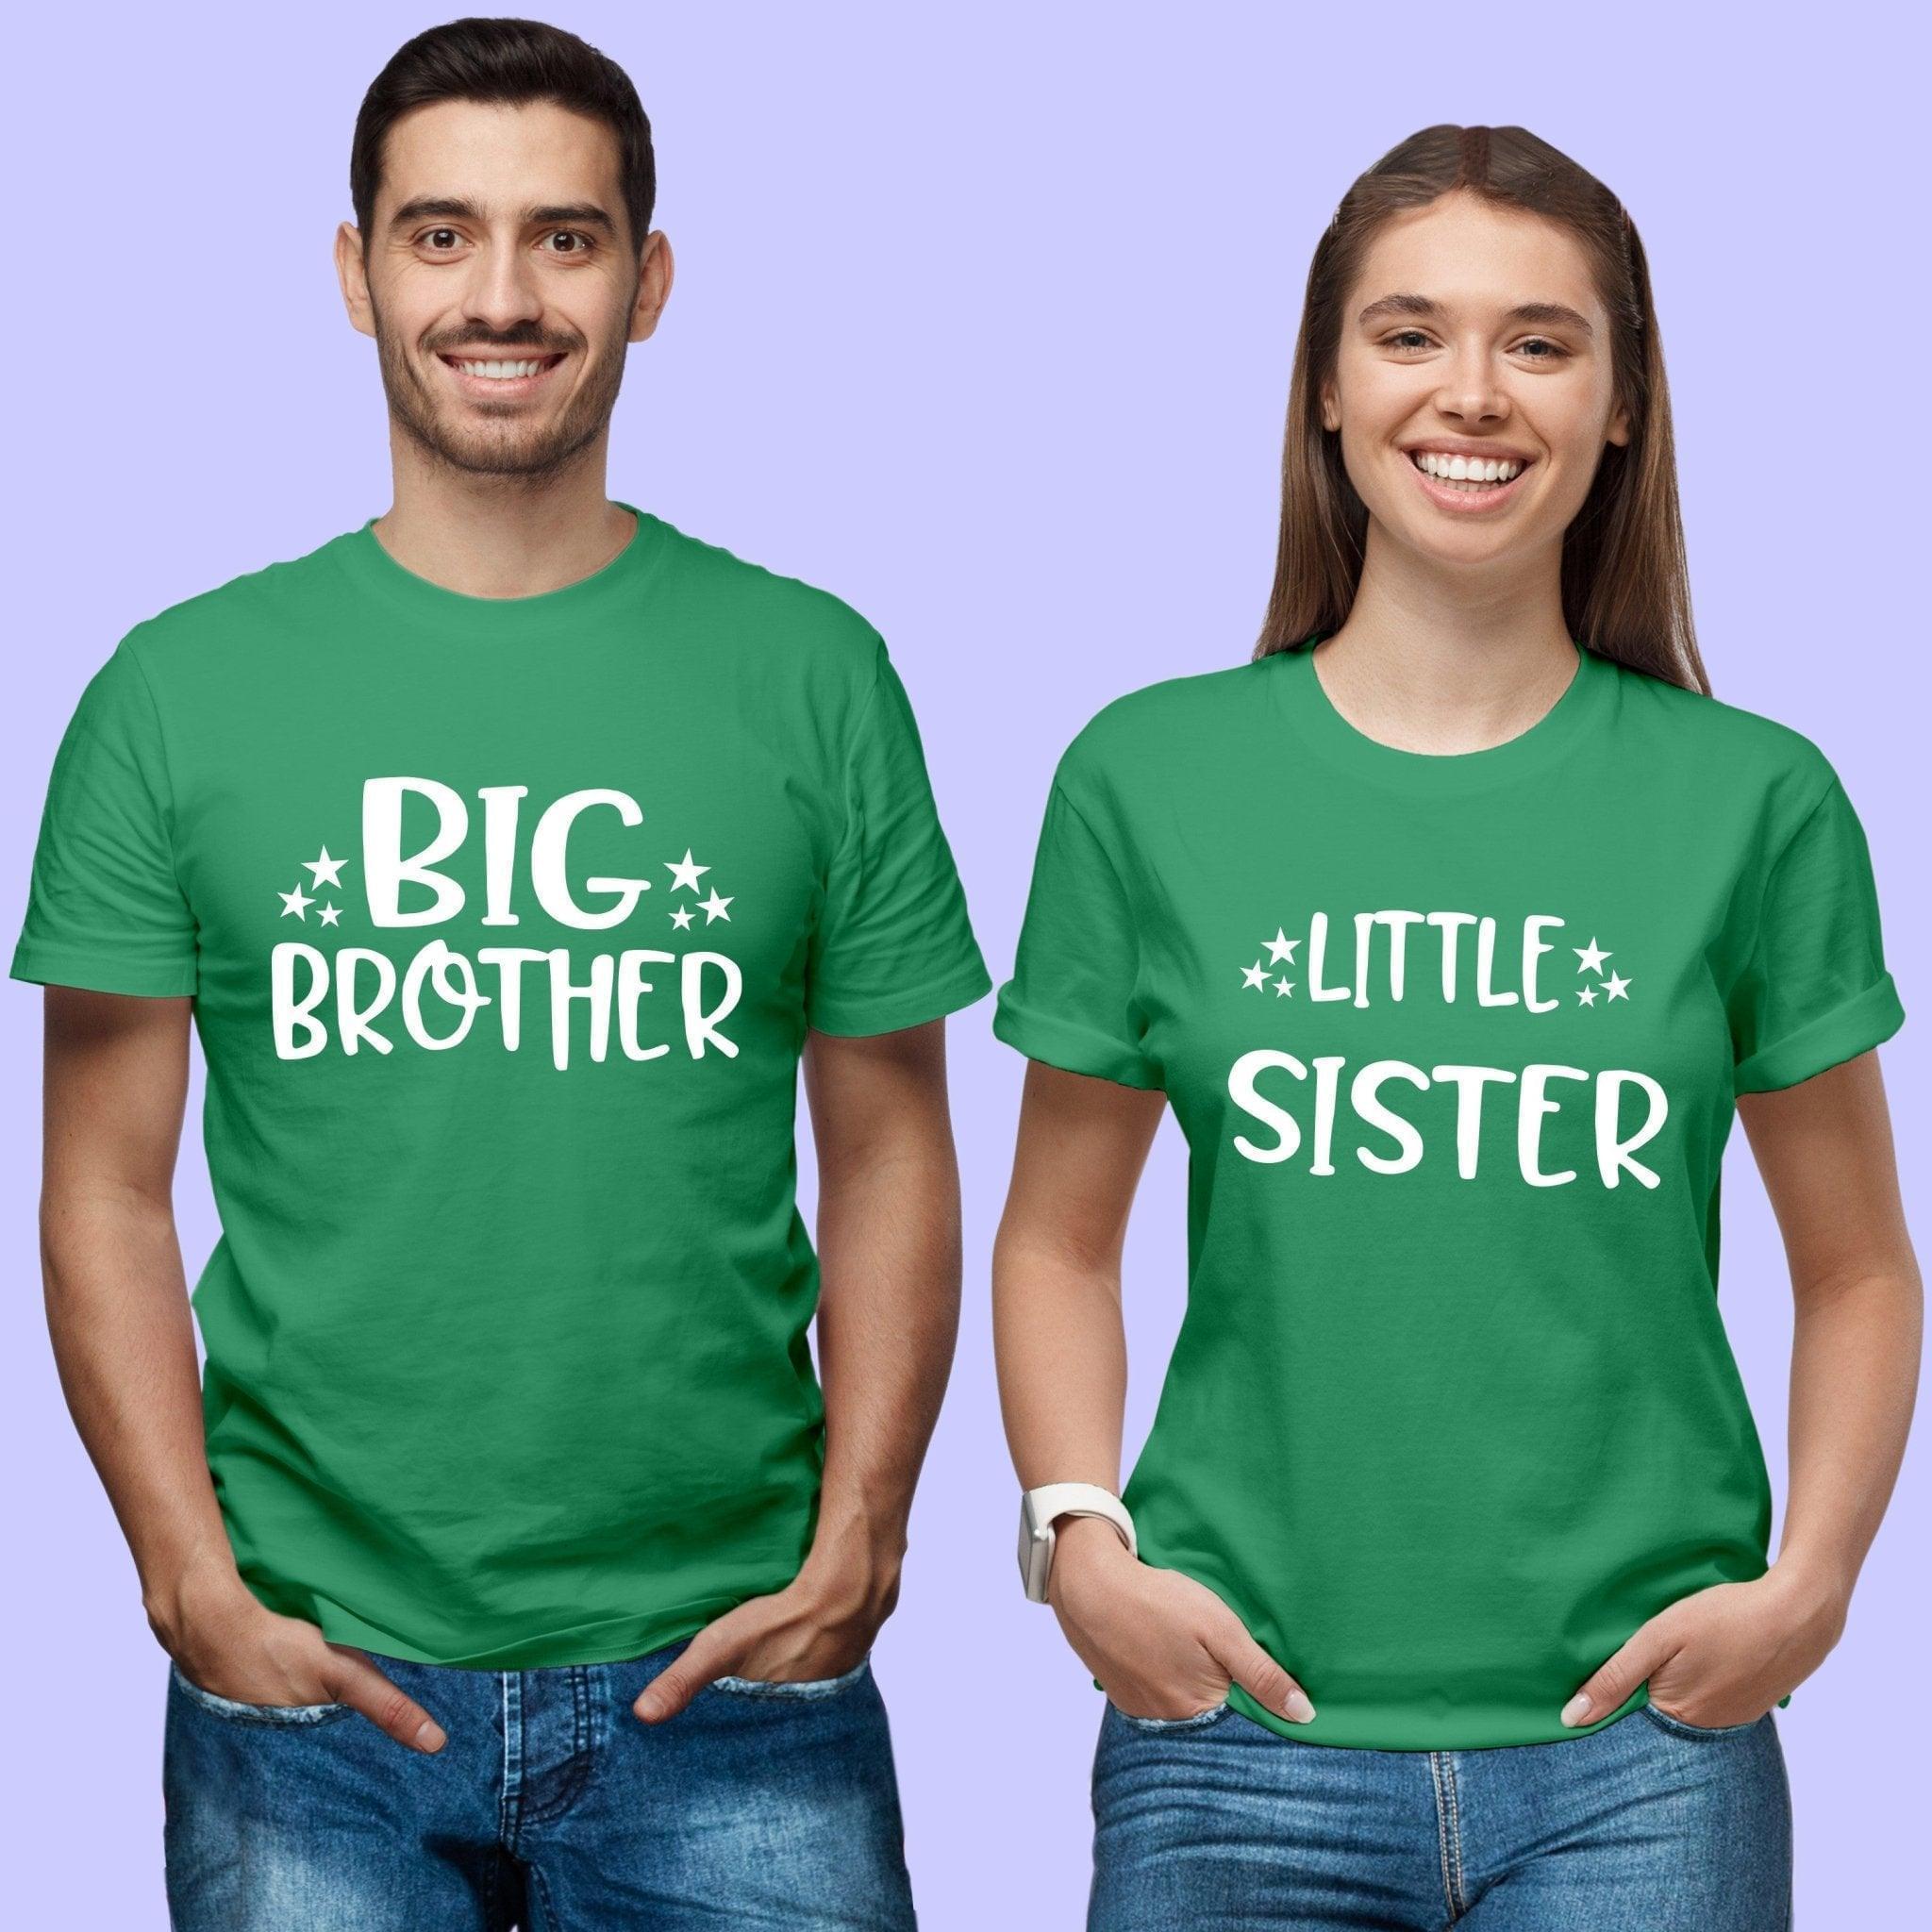 Sibling T Shirt for Adult Brother and Sister in Green Colour - Big Brother Little Sister Variant